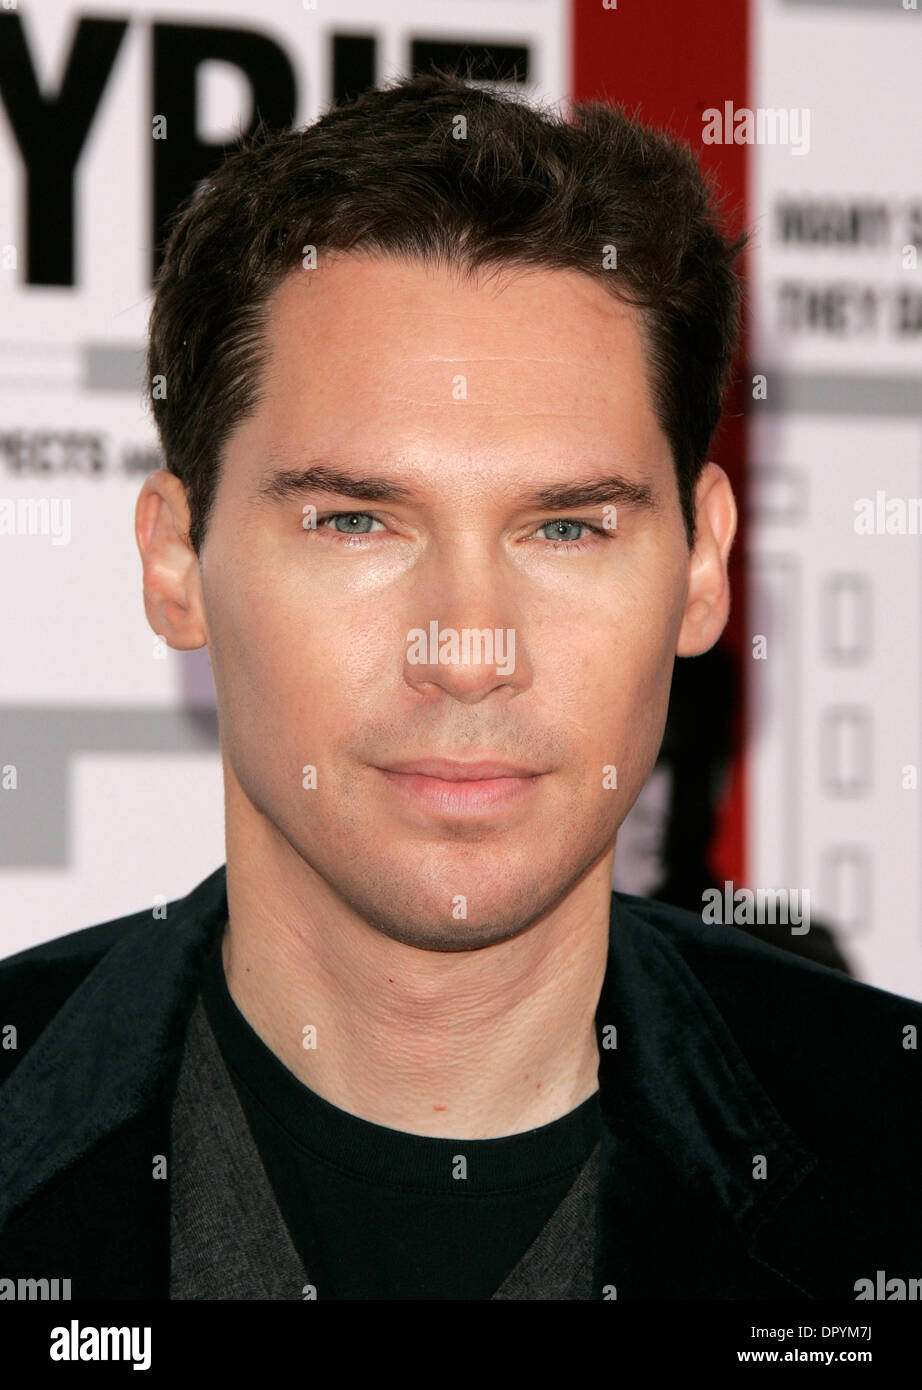 Dec 18, 2008 - Los Angeles, California, USA - Director BRYAN SINGER arriving to 'Valkyrie' Los Angeles Premiere held at the Director's Guild of America. (Credit Image: © Lisa O'Connor/ZUMA Press) Stock Photo